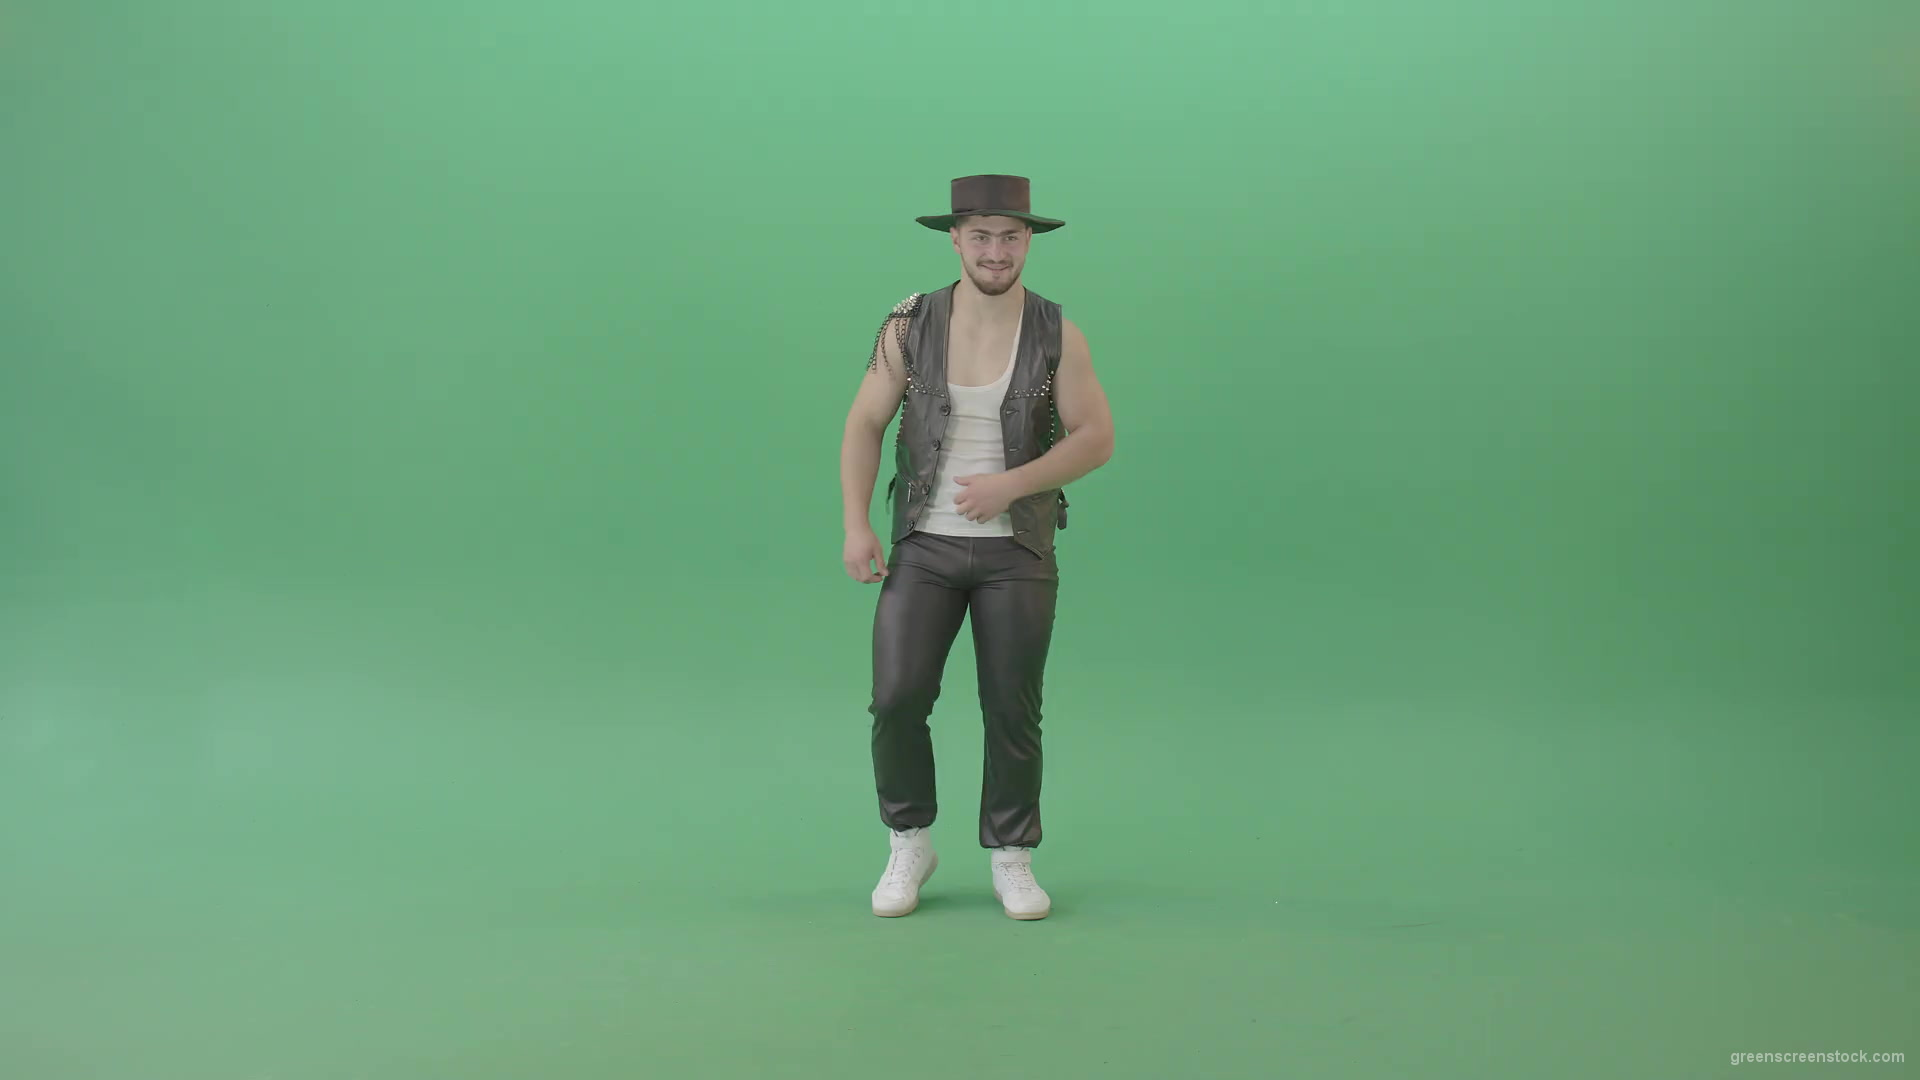 American-Man-with-beard-and-in-black-hat-dancing-Shuffle-isolated-on-Chroma-key-green-screen-4K-Video-Footage-1920_001 Green Screen Stock